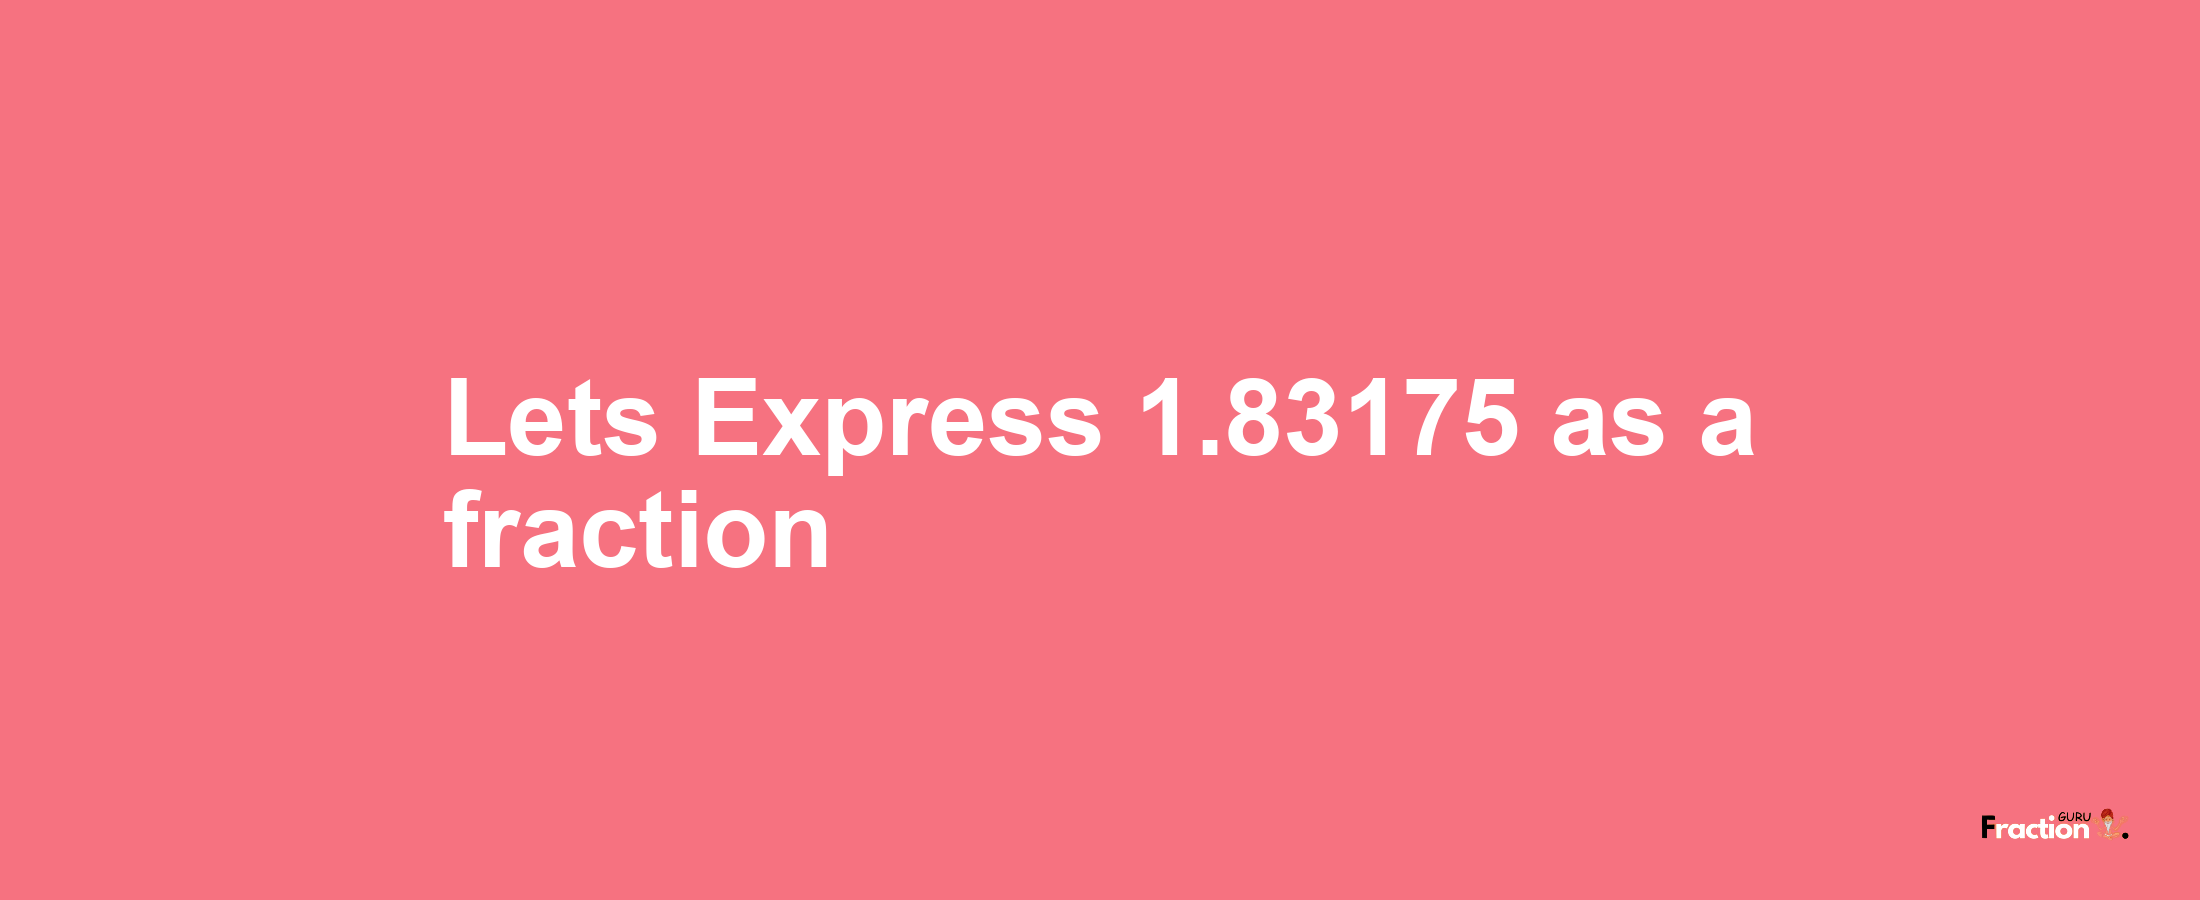 Lets Express 1.83175 as afraction